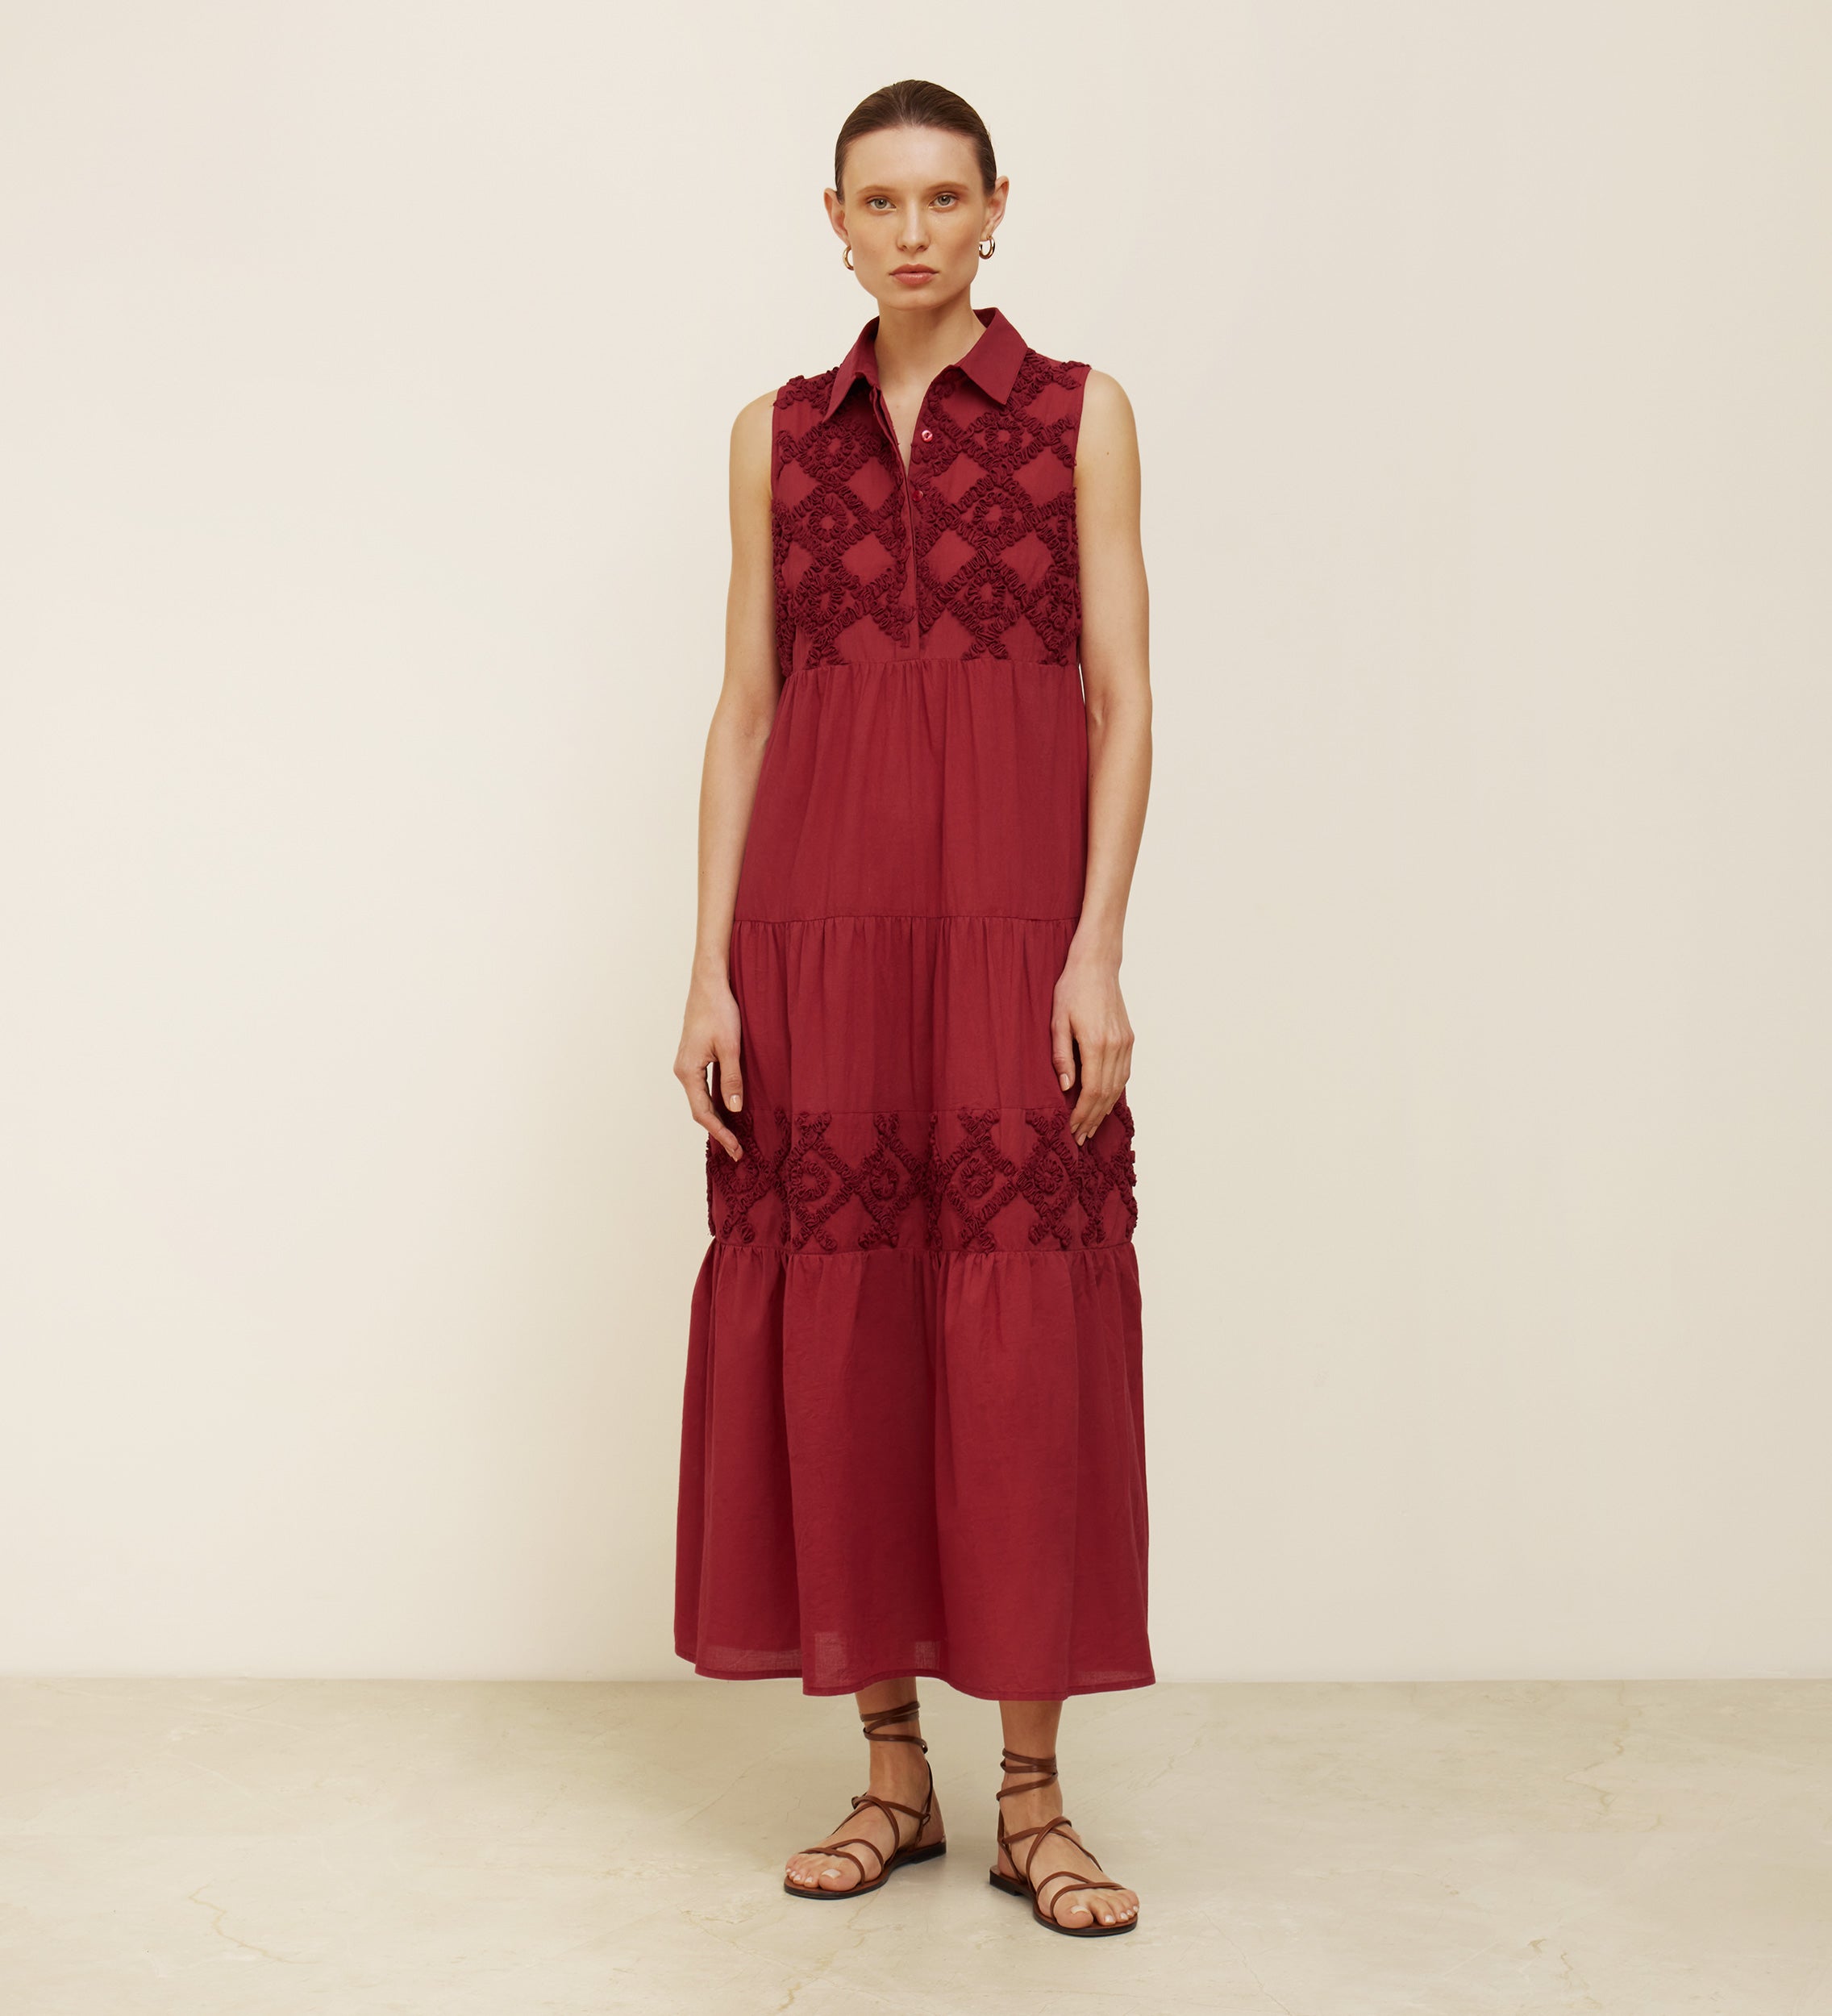 Embroidered dress with gathered floors